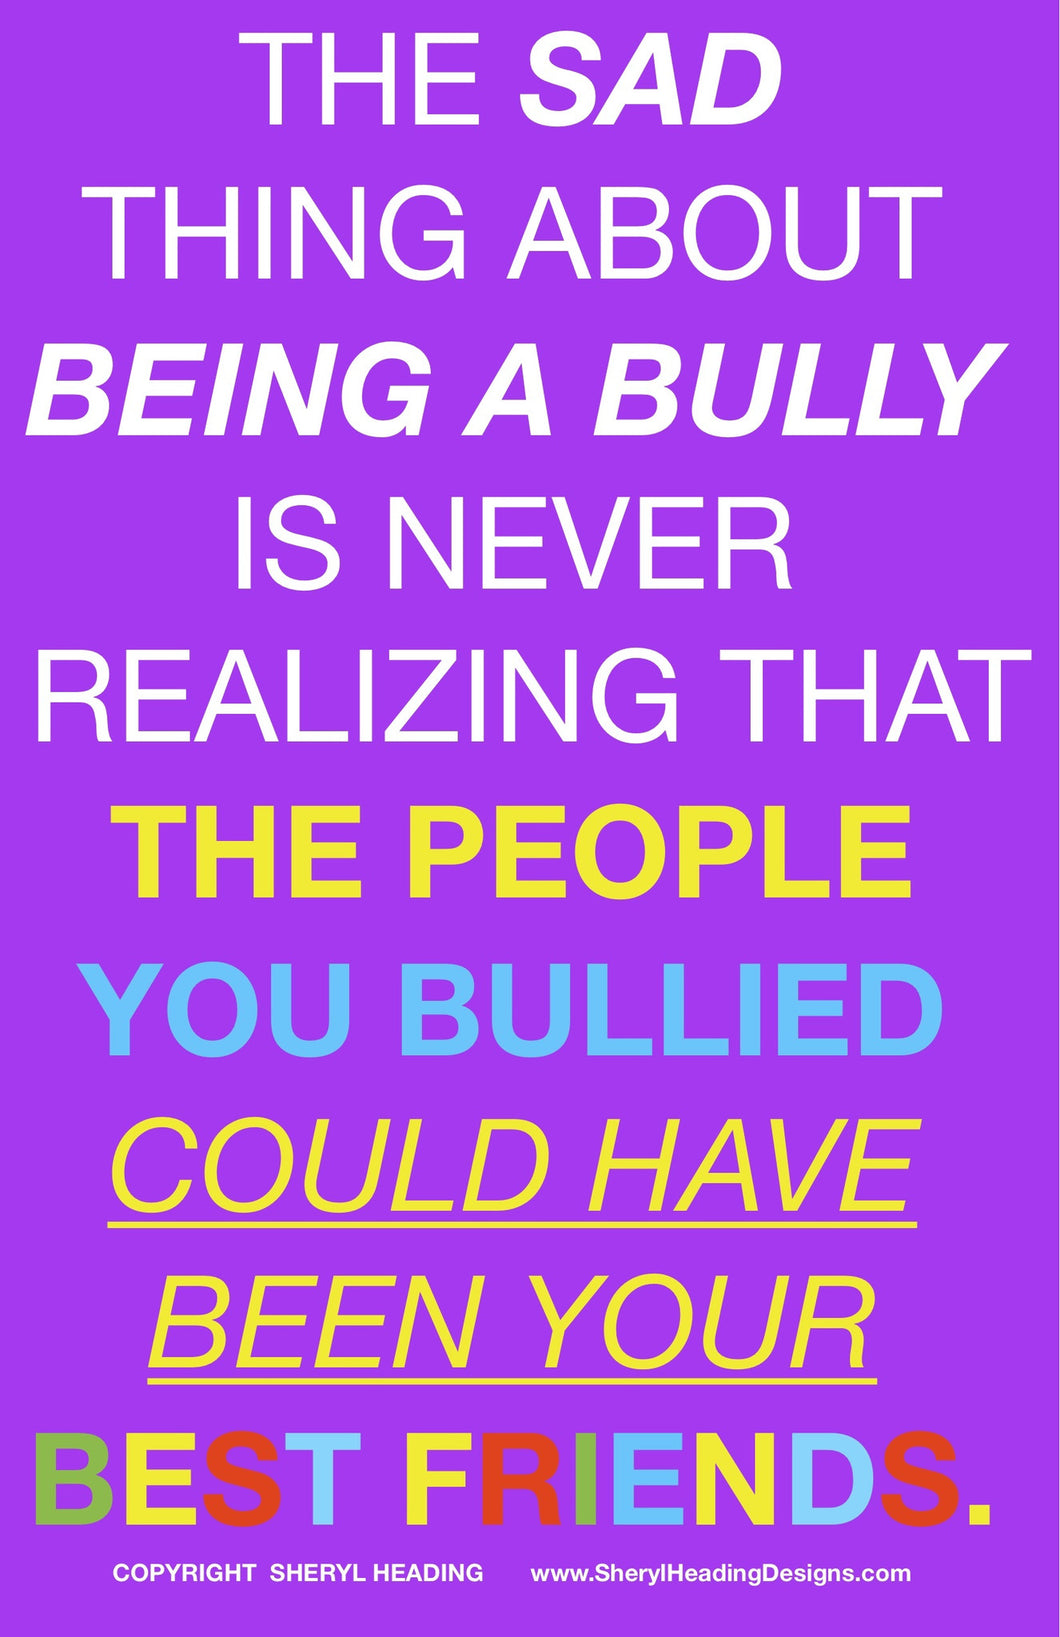 The Sad Thing About Being A Bully... Poster - Sheryl Heading Designs